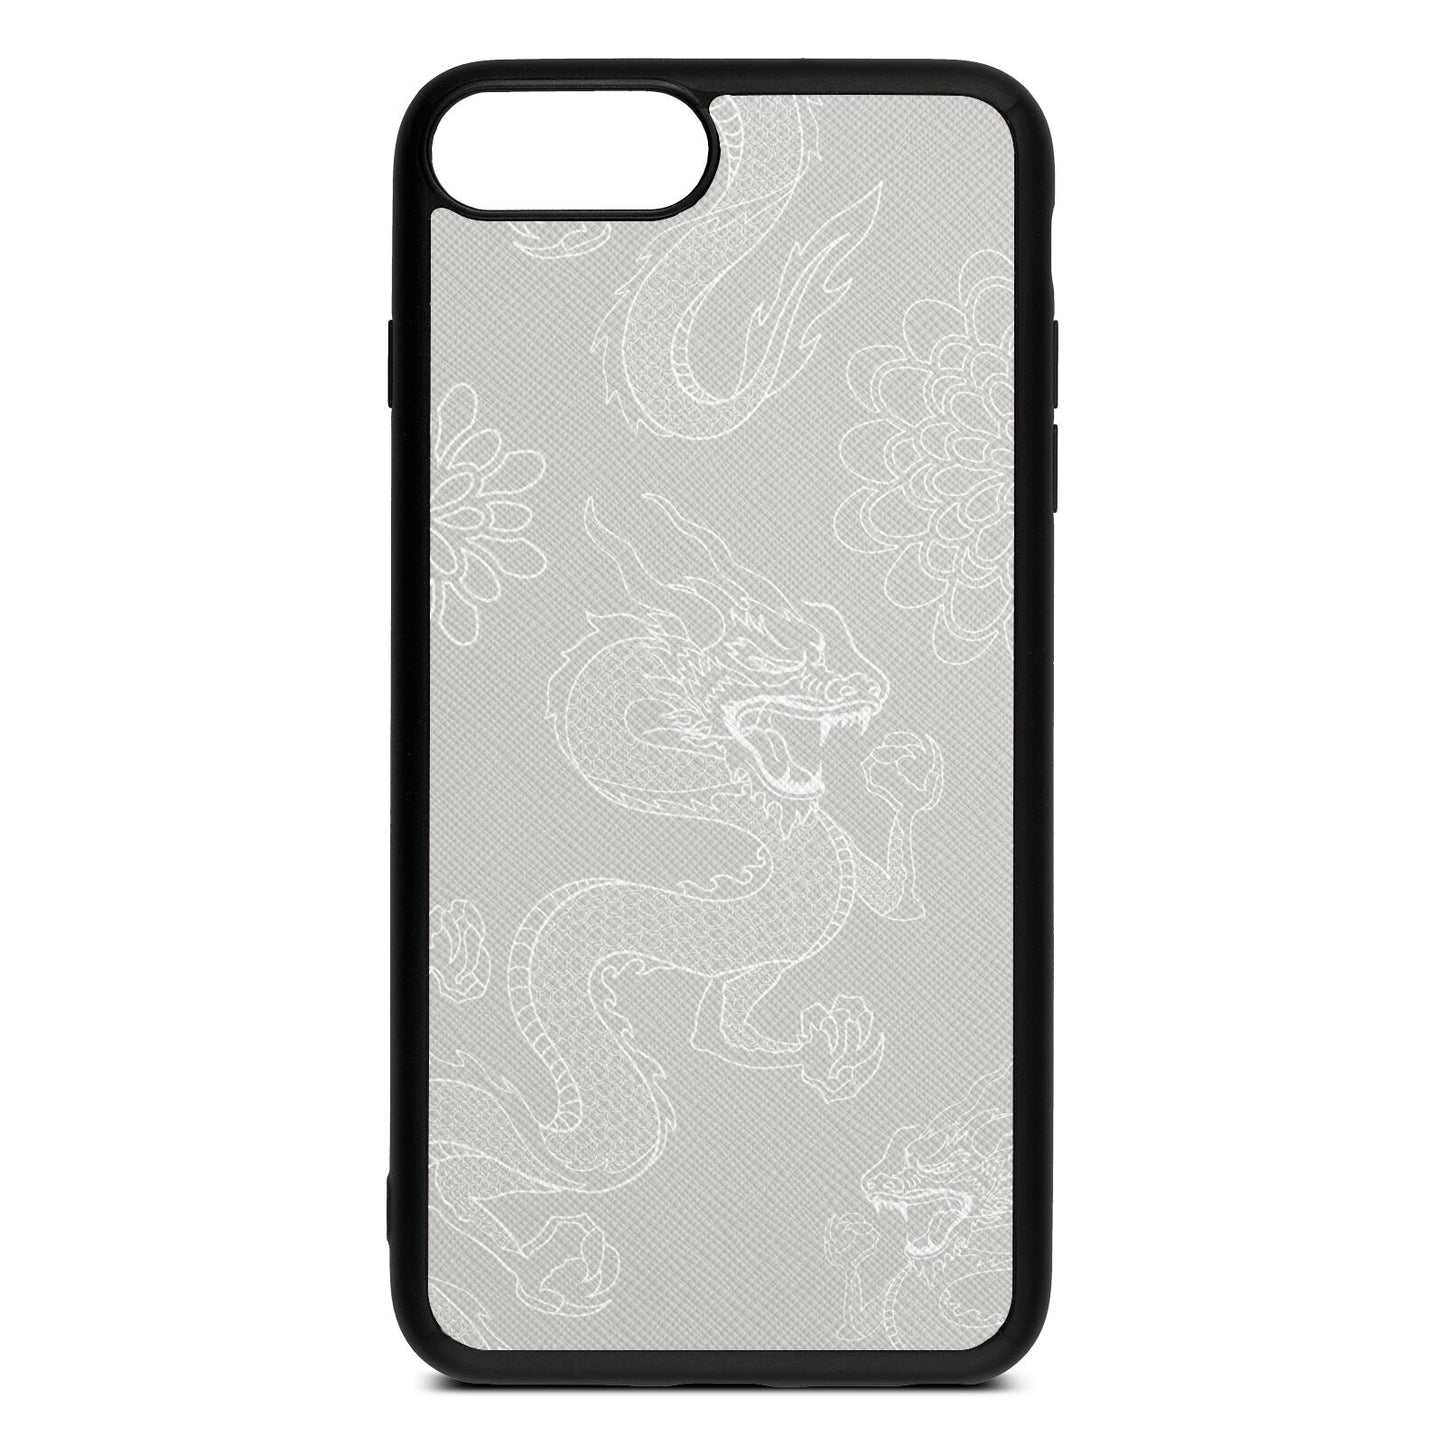 Dragons Silver Saffiano Leather iPhone 8 Plus Case